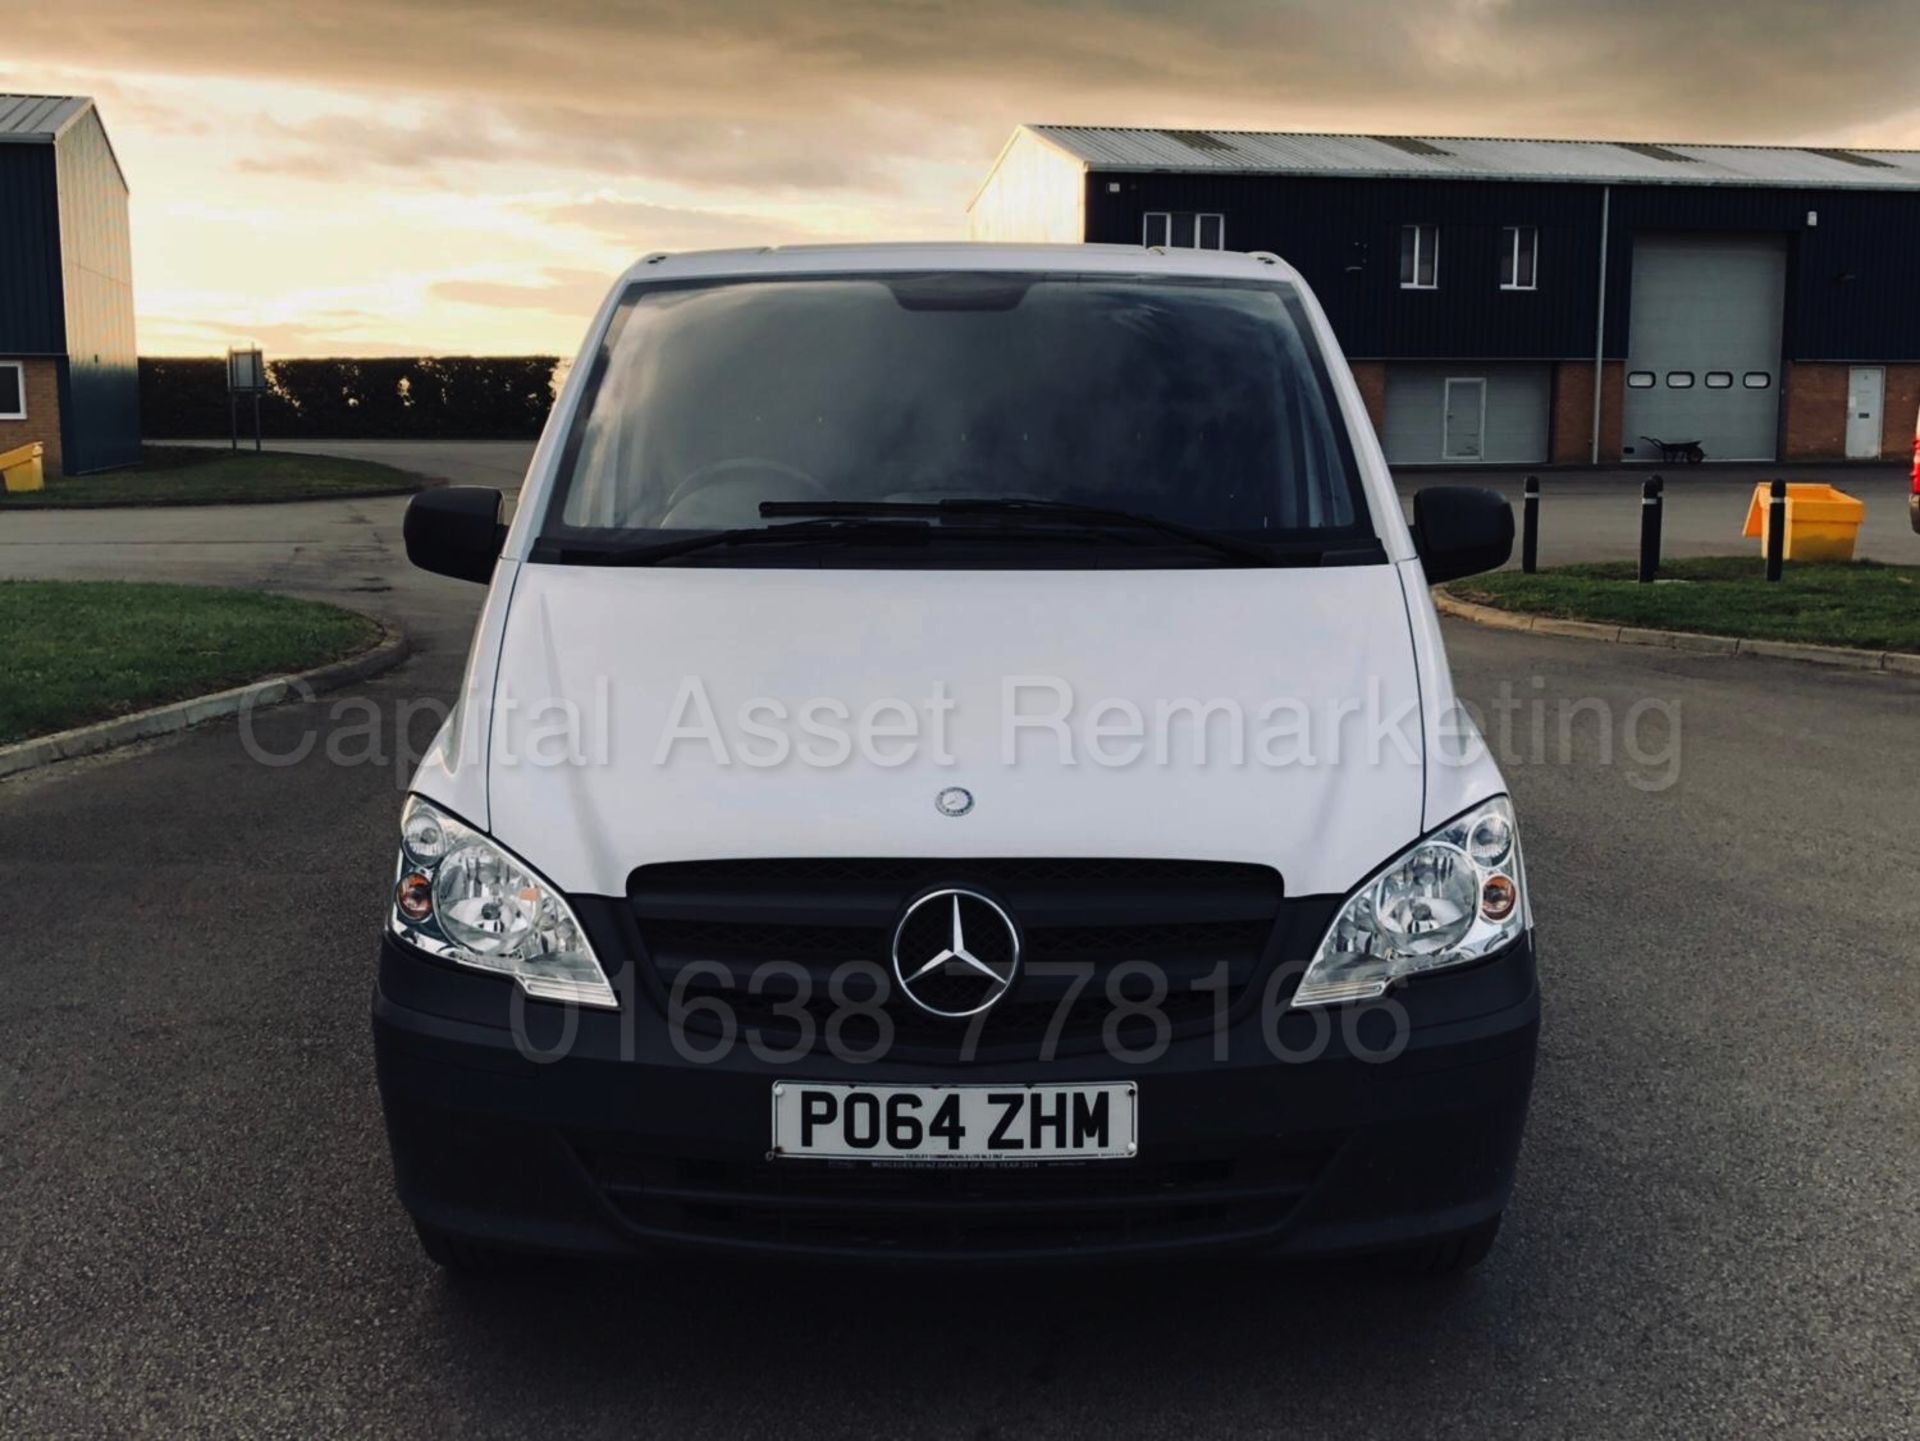 MERCEDES VITO 113CDI LWB (2015 MODEL - NEW SHAPE) 1 OWNER - LOW MILES - ELEC PACK - 130BHP - 6 SPEED - Image 2 of 30